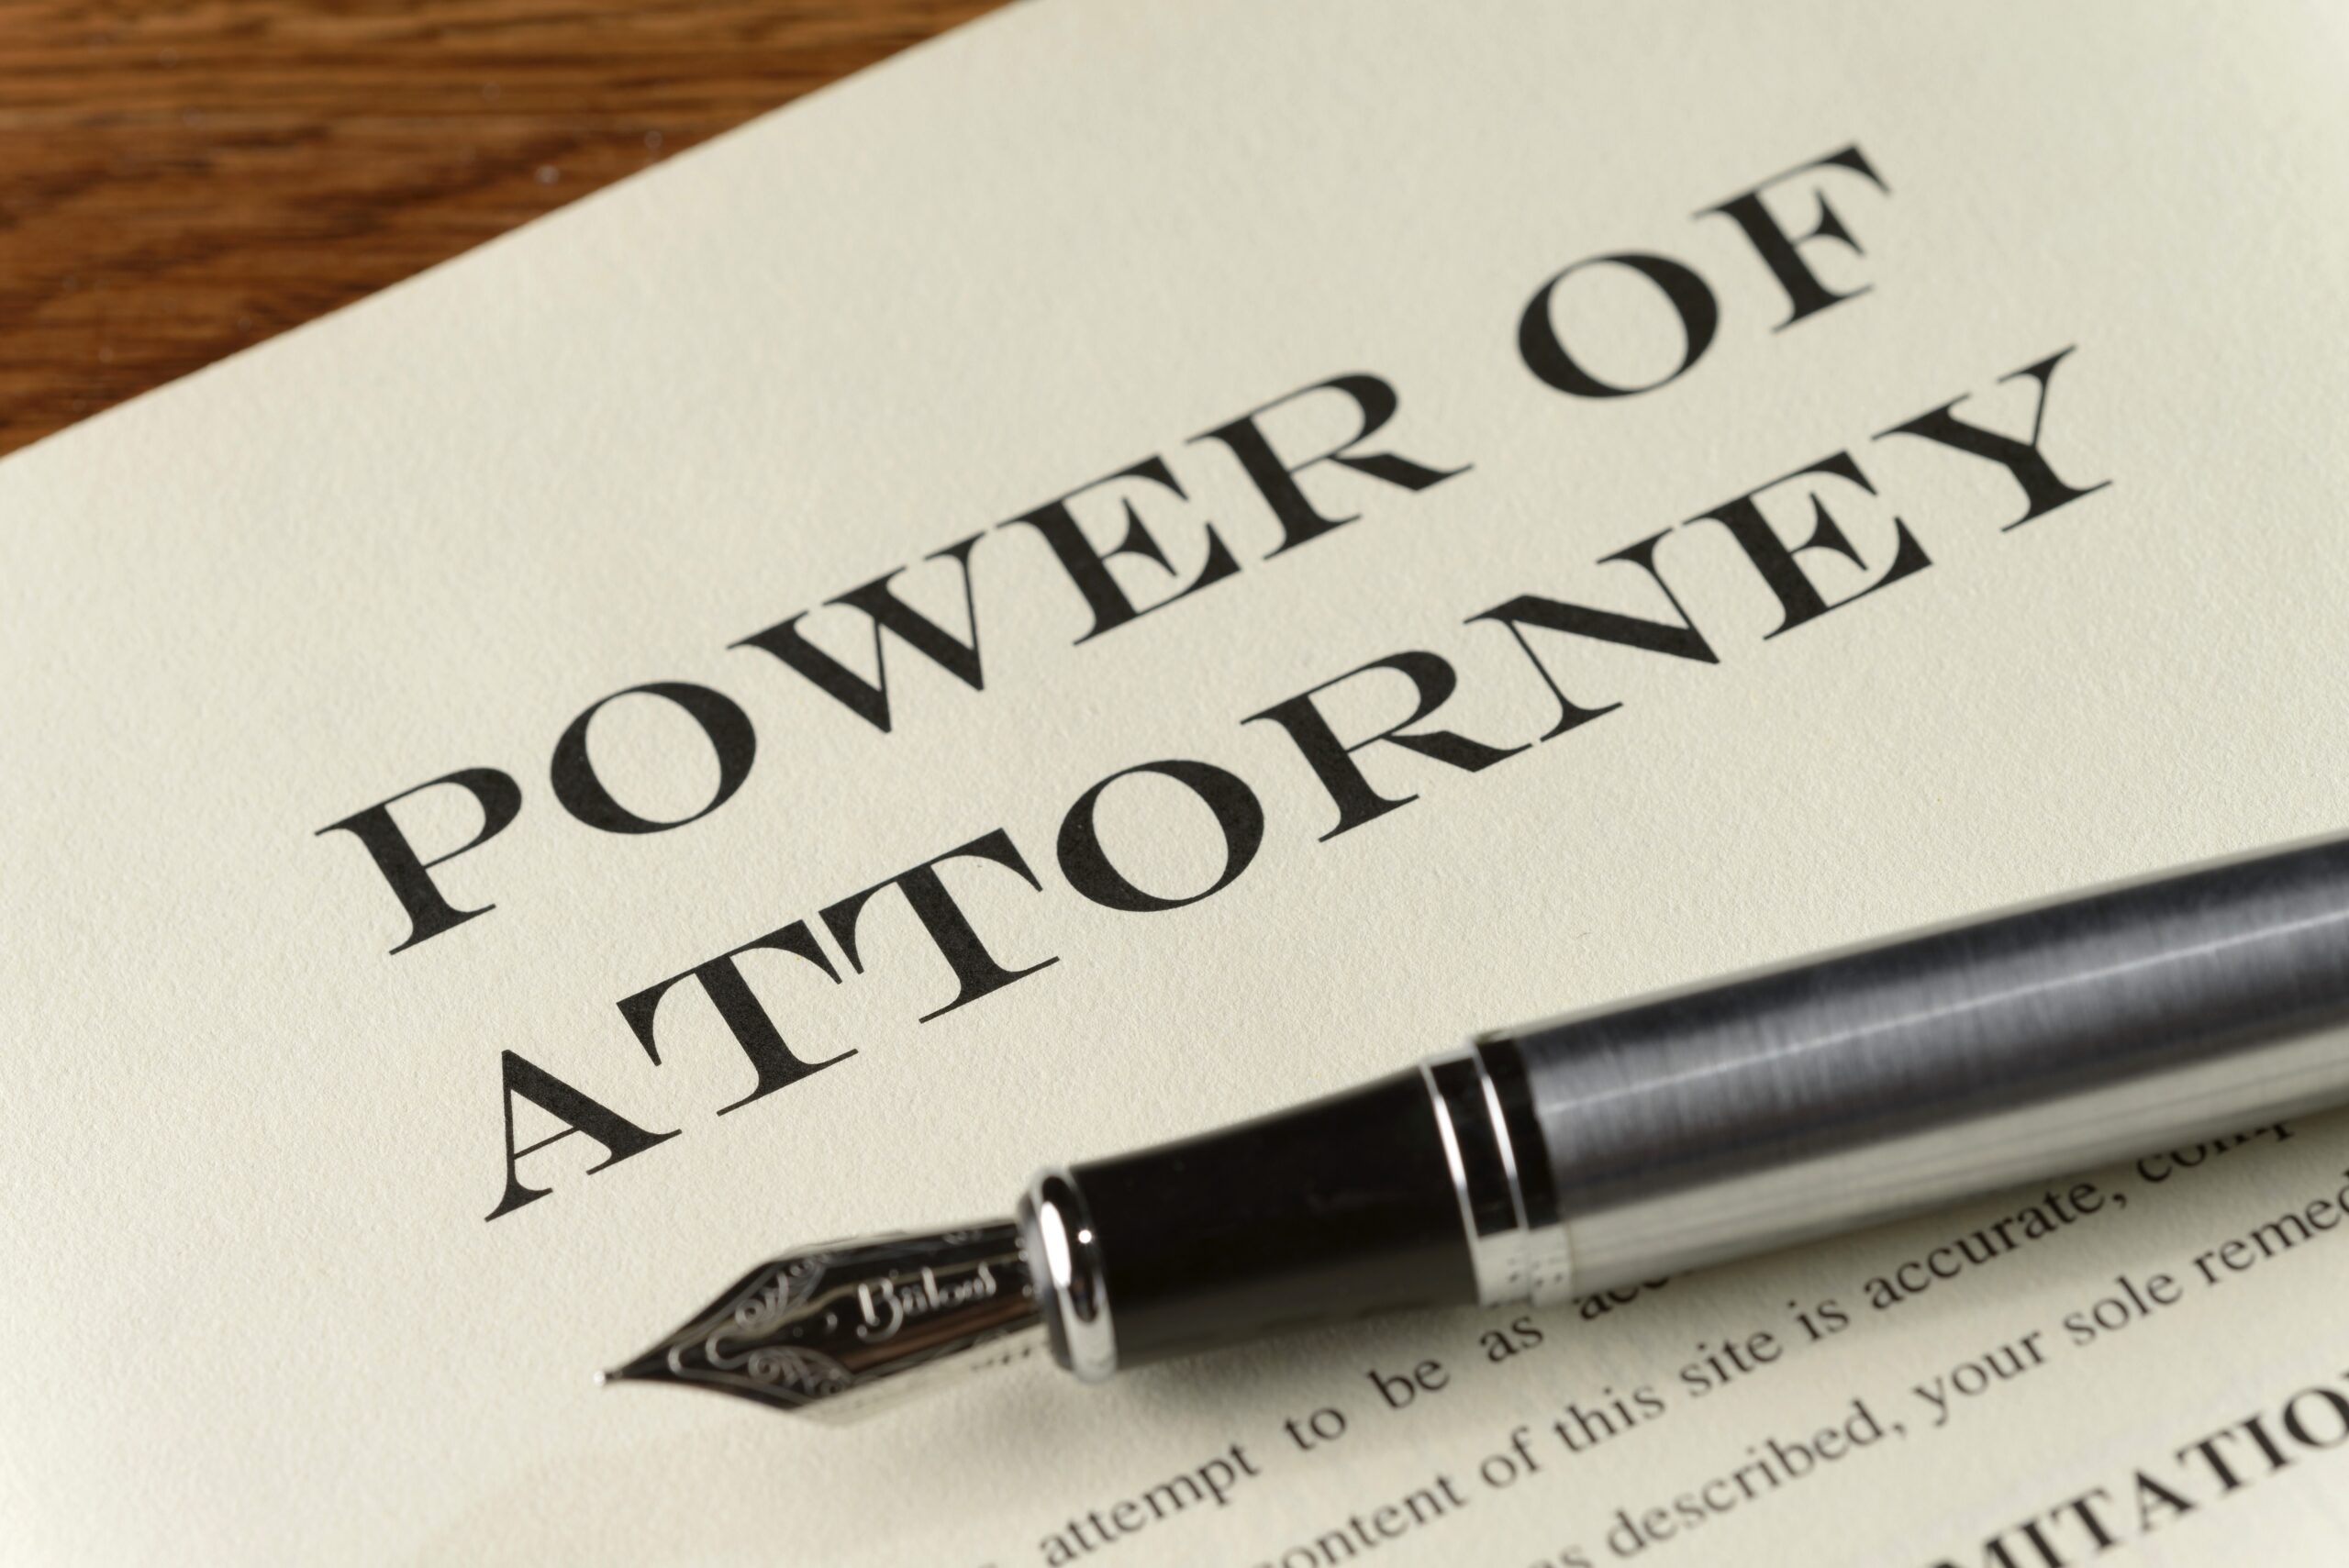 Power of Attorney document requiring authentication by apostille.